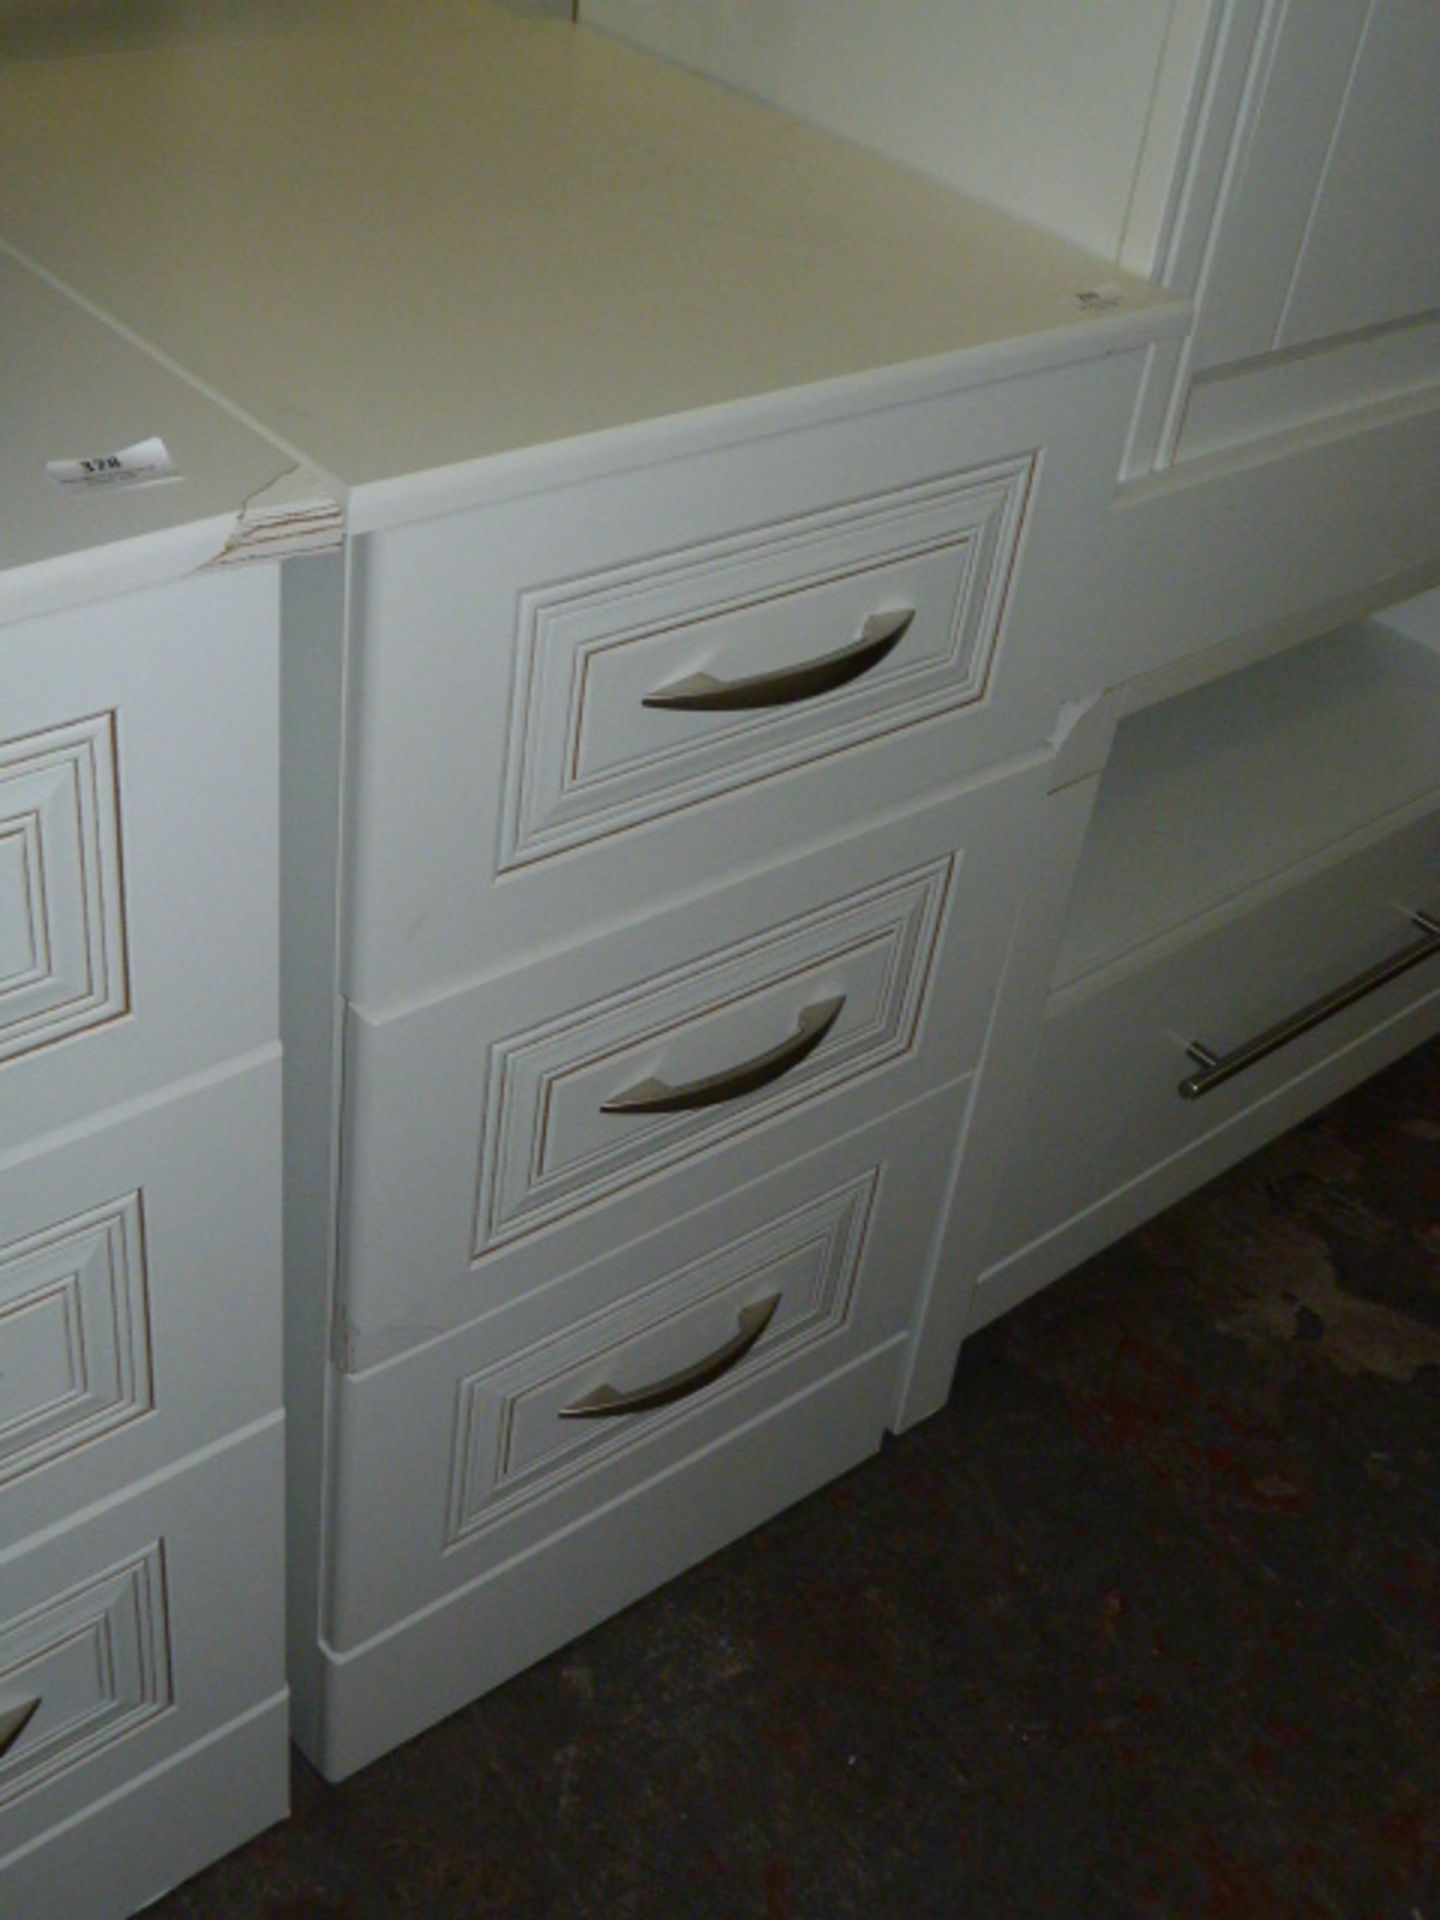 *White Three Drawer Bedside Cabinet with Brushed Stainless Steel Handles